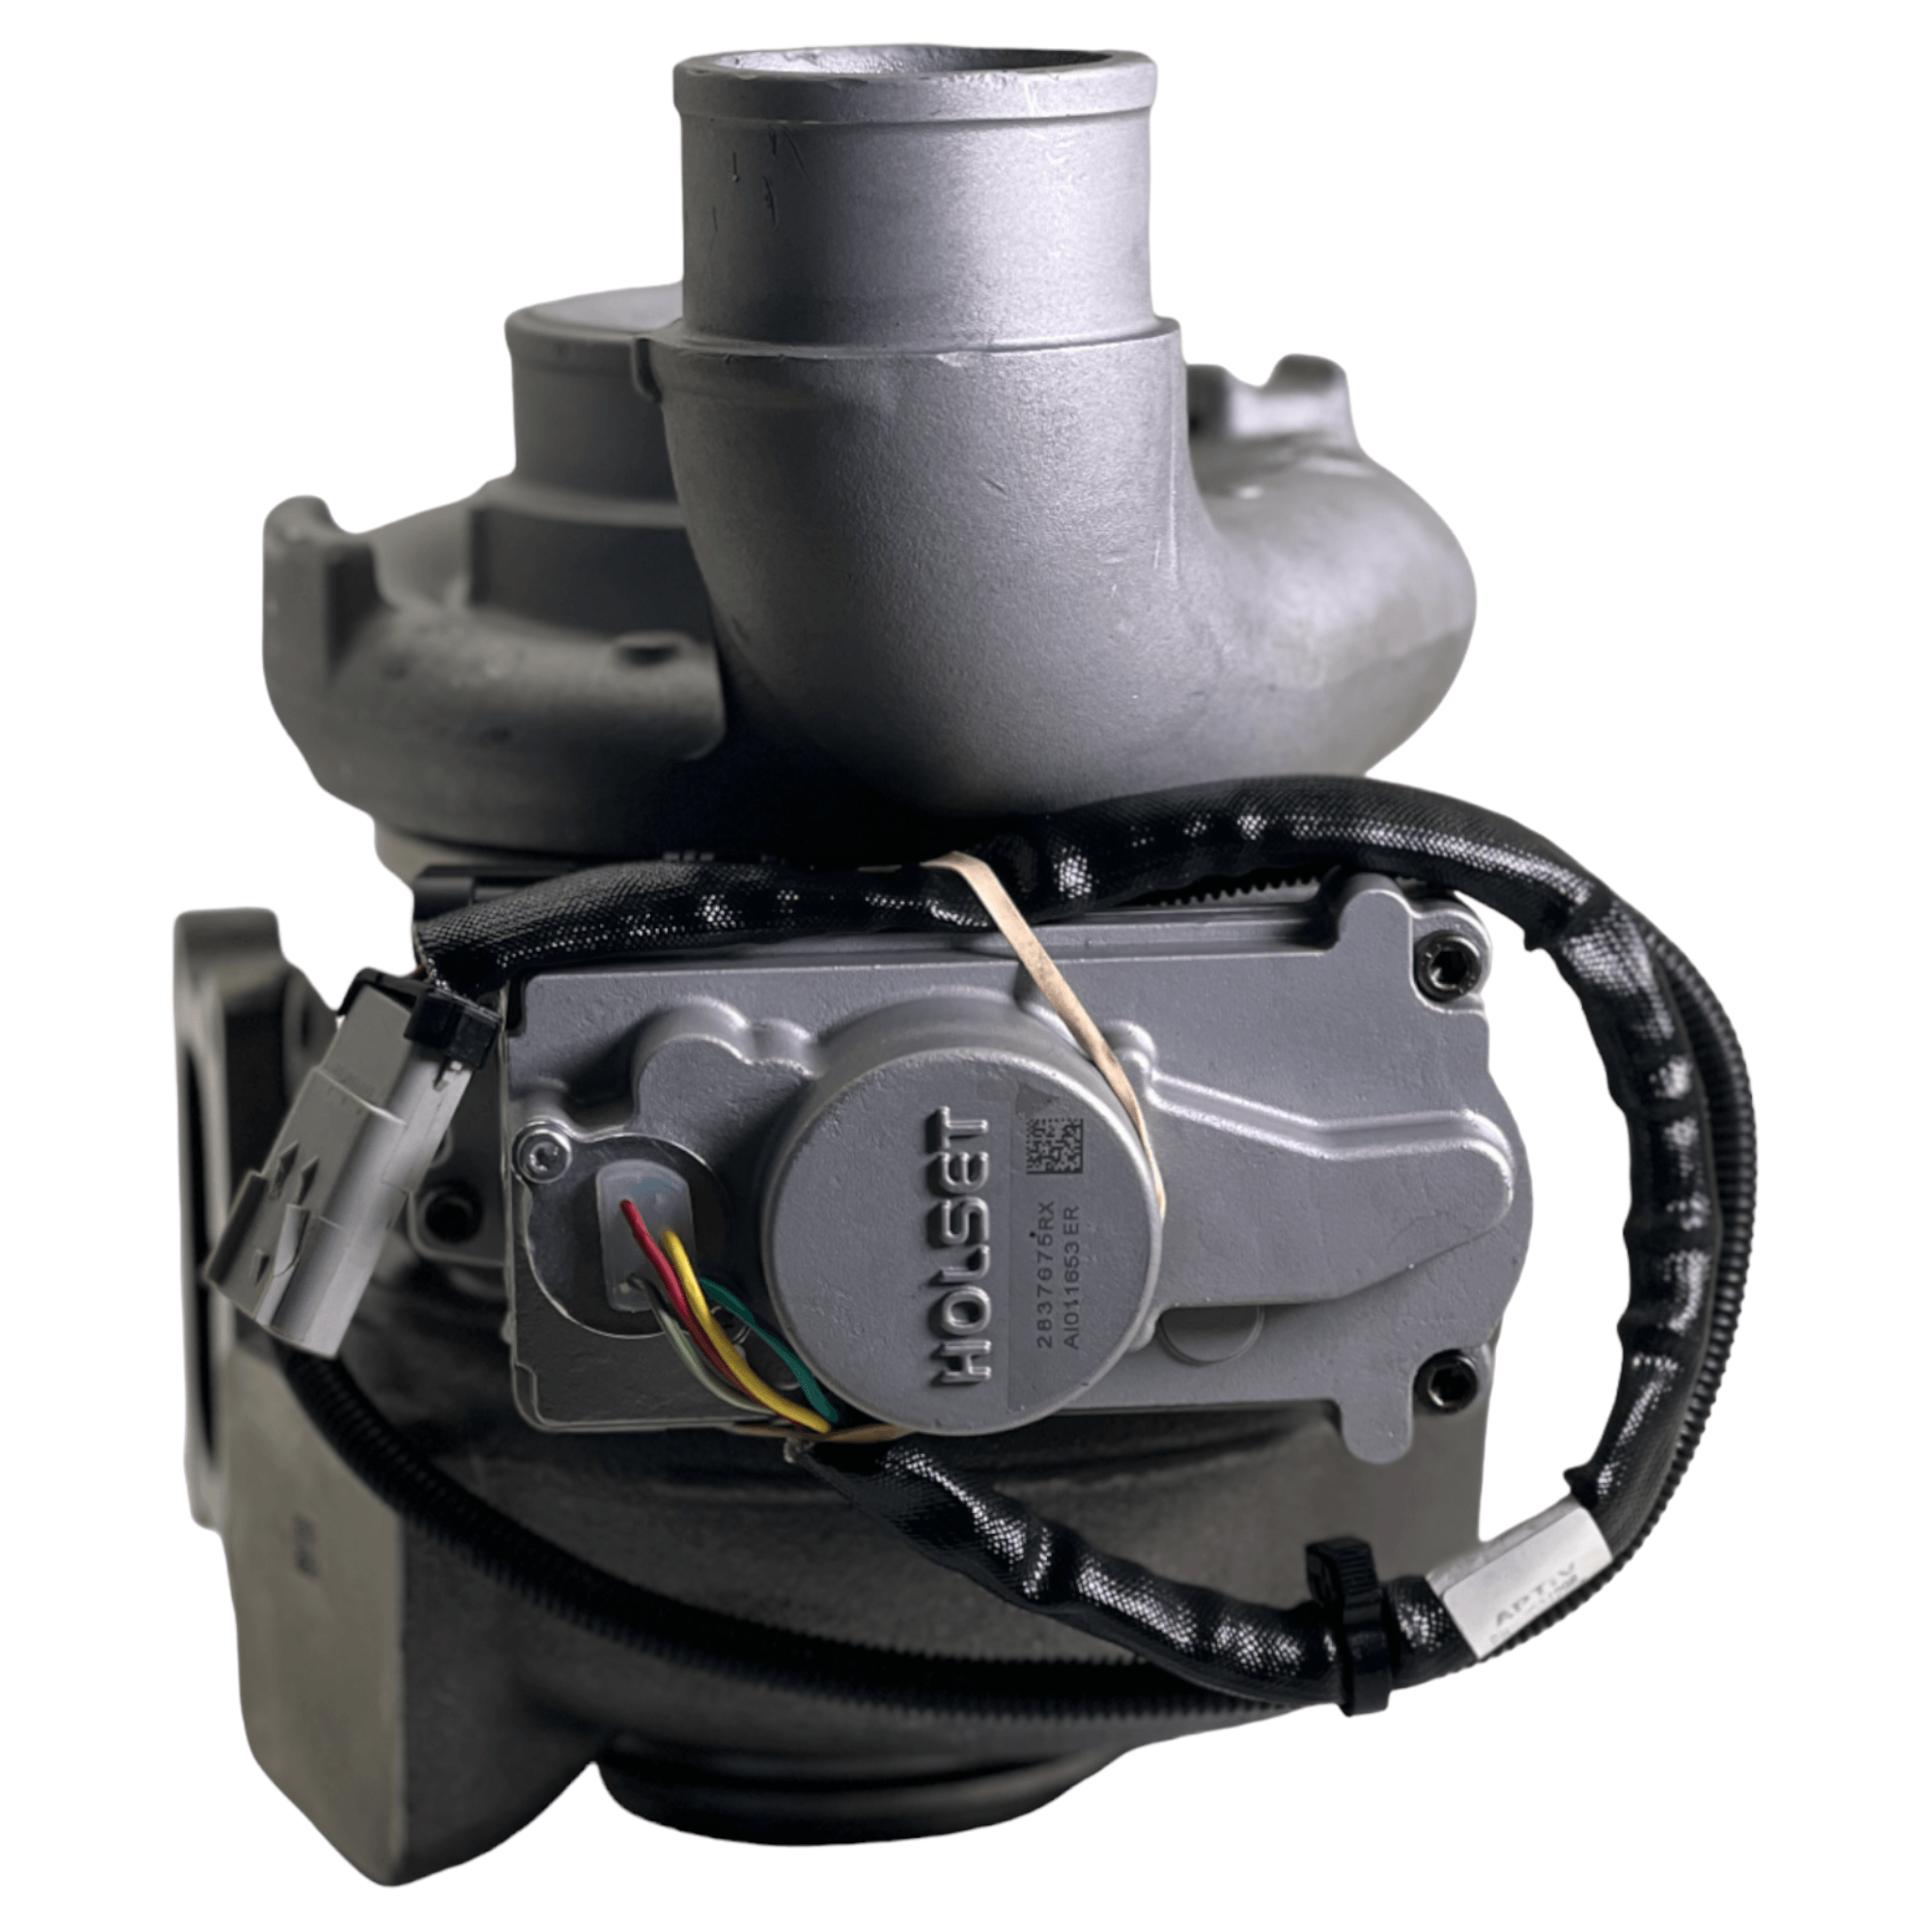 5322344RX Genuine Cummins Turbocharger HE351VE With Actuator - ADVANCED TRUCK PARTS